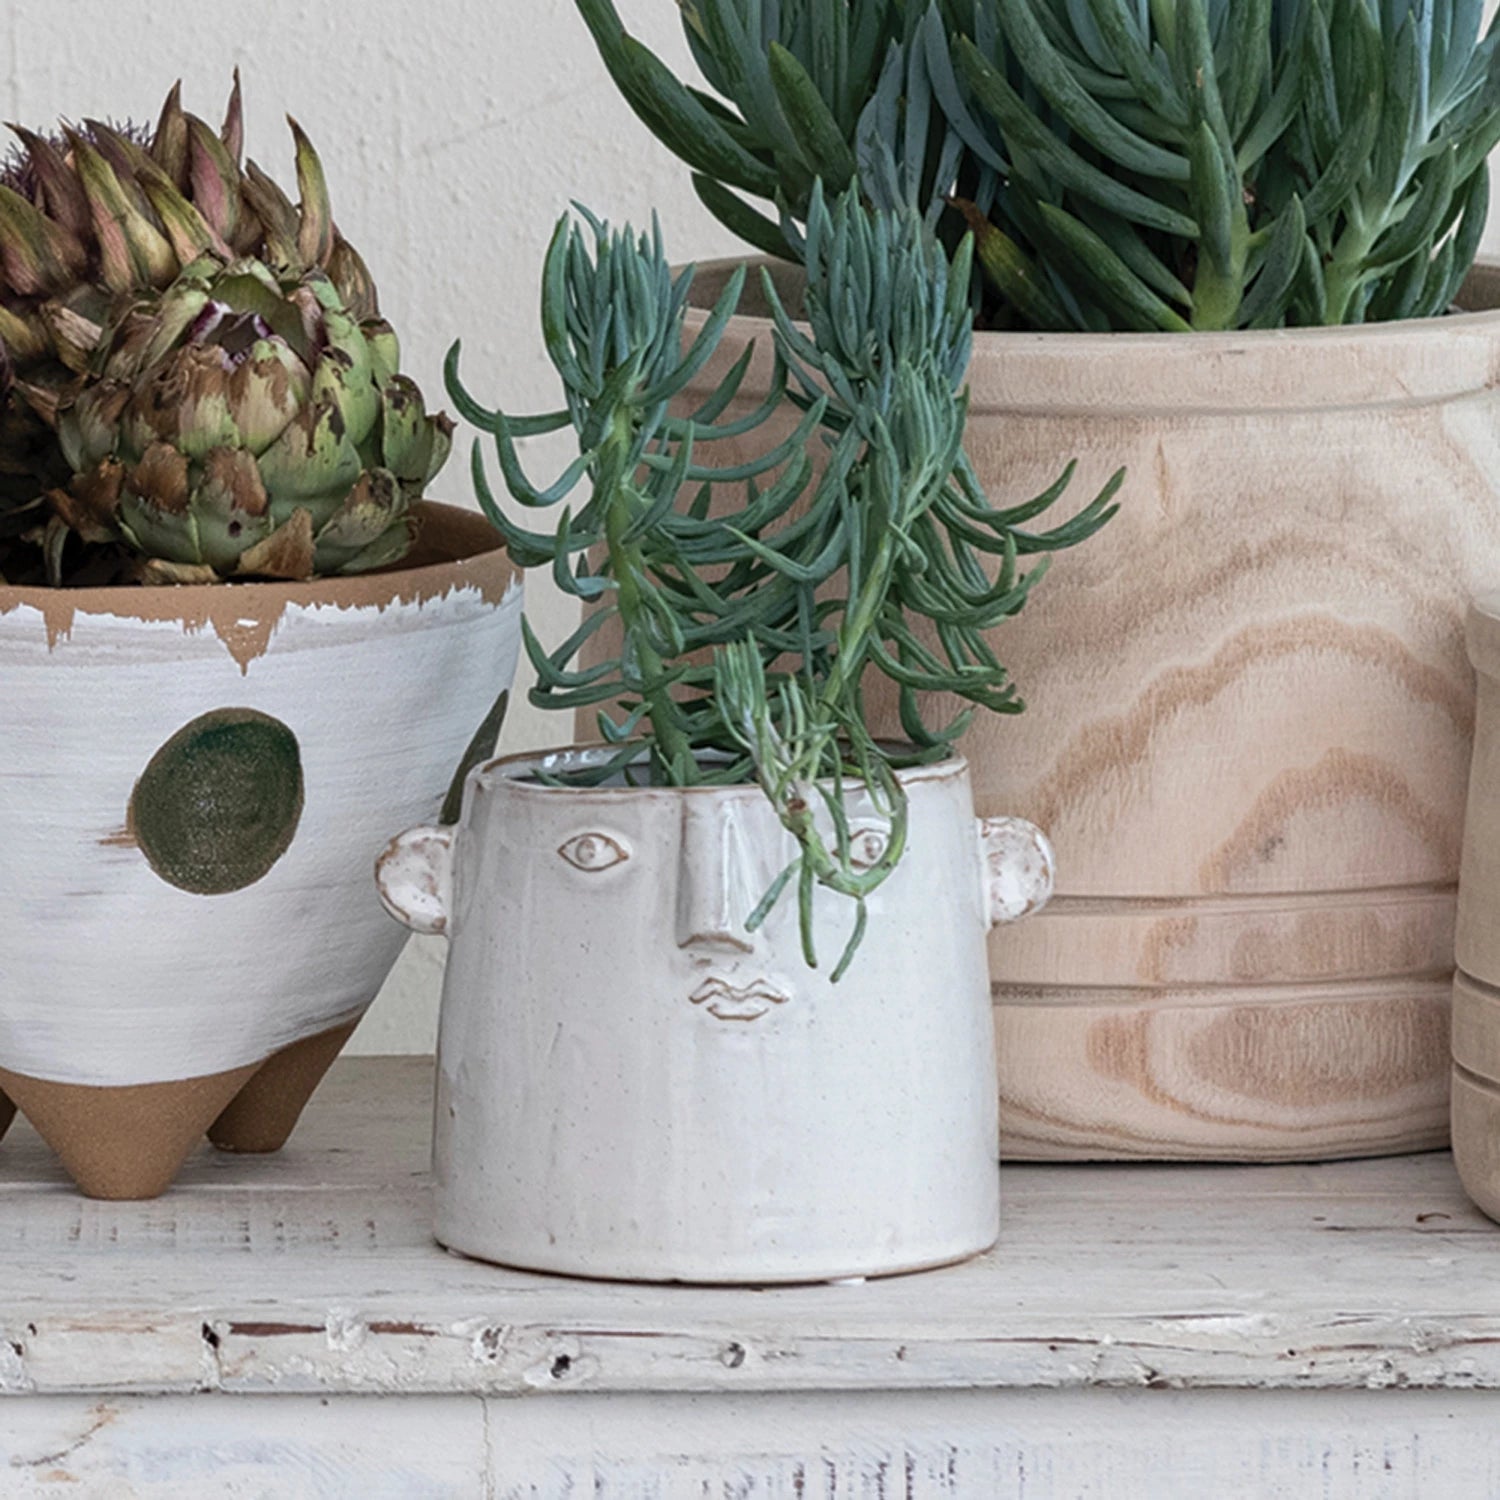 off-white planter with simple face design on the front filled with succulent and  surrounded by other potted plants.